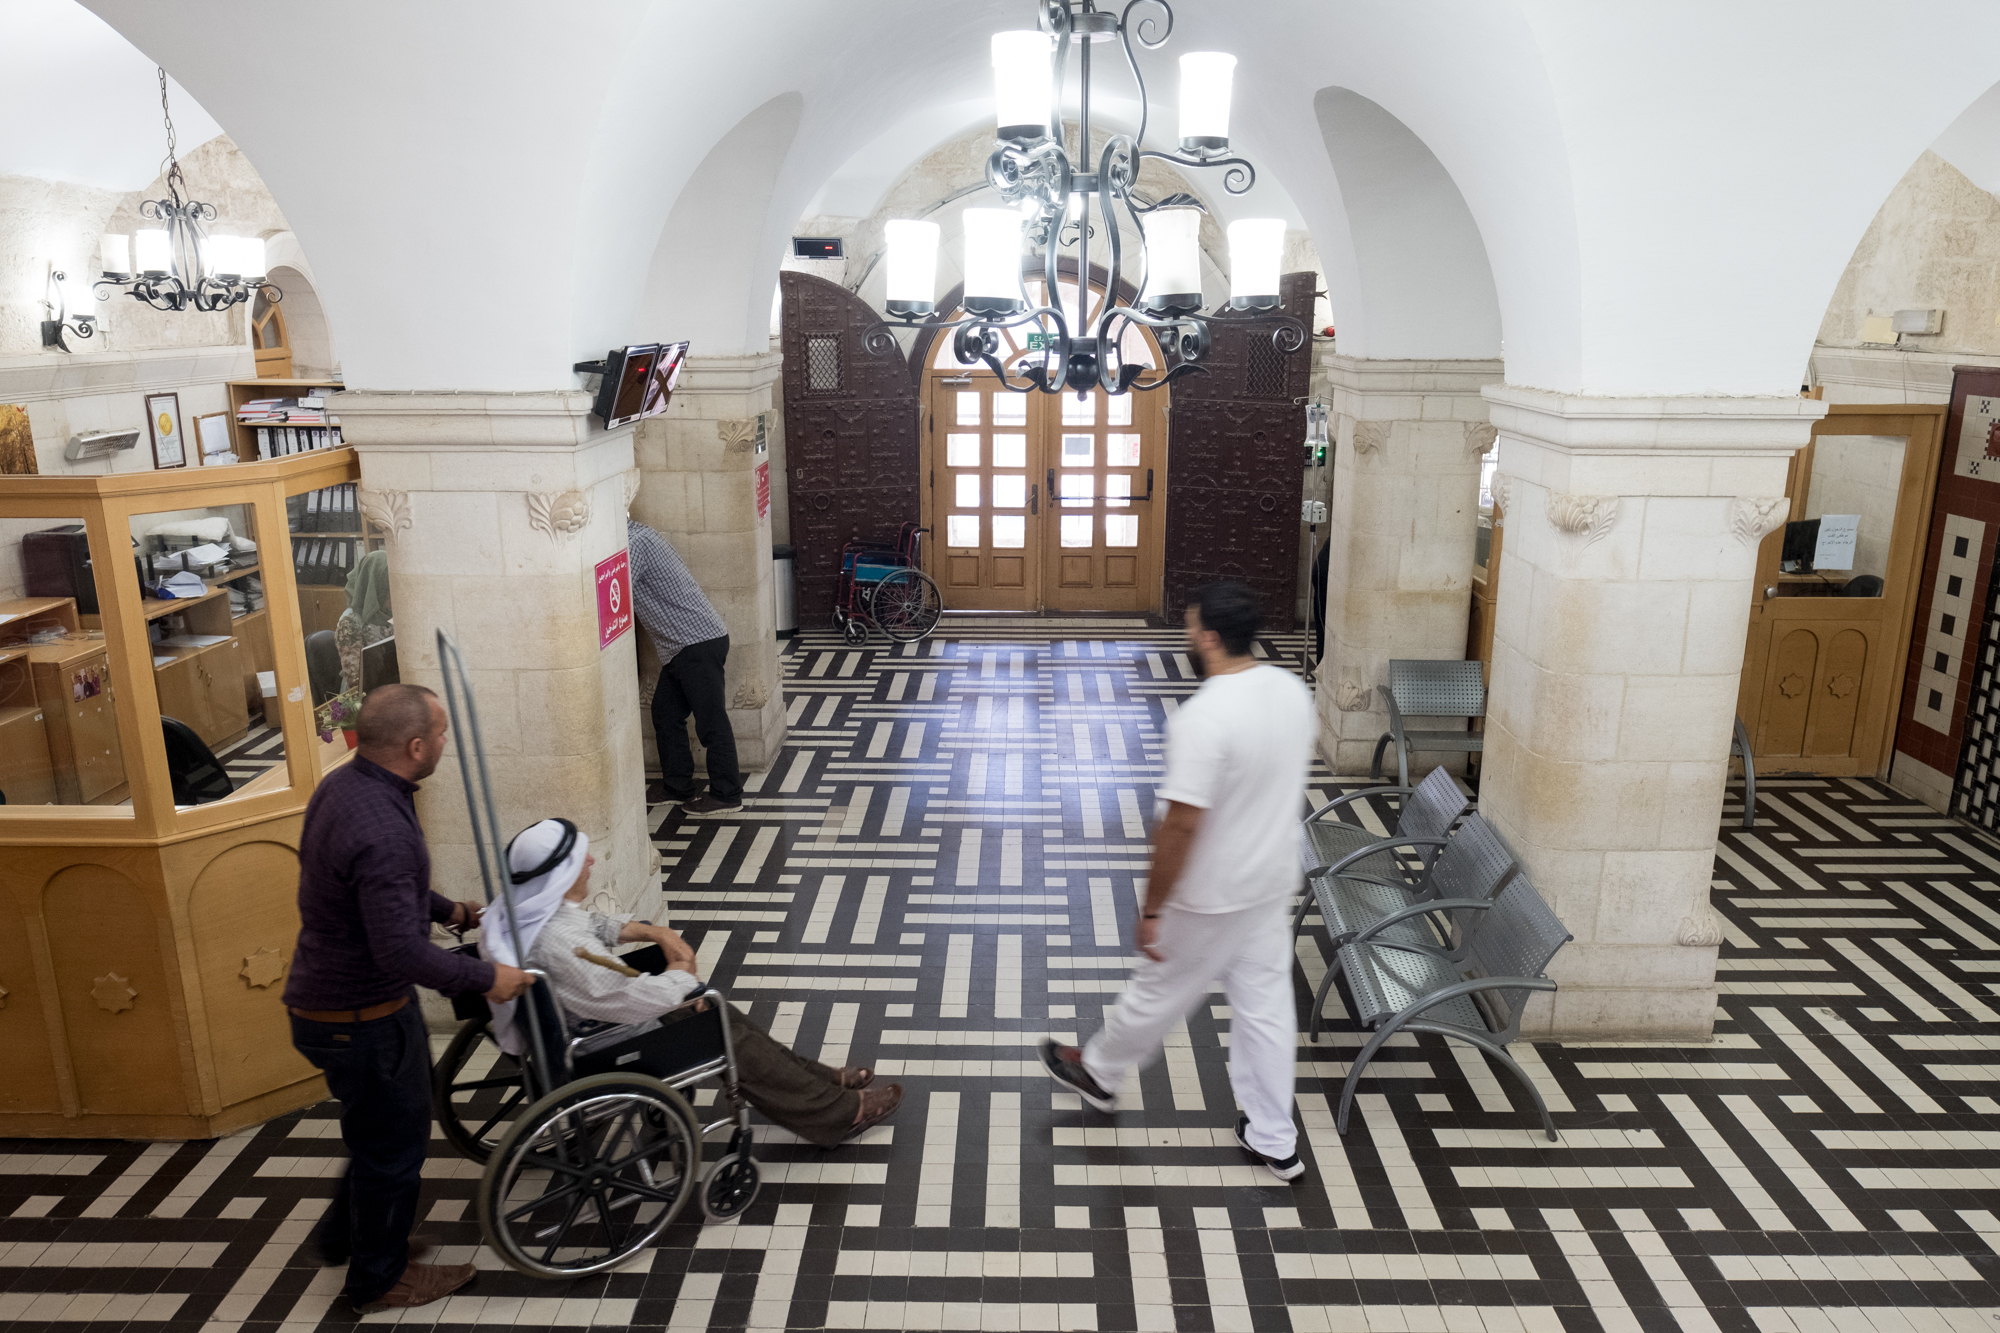 Patients and staff make their way through the lobby of The Lutheran World Federation's Augusta Victoria Hospital (AVH) in East Jerusalem on Saturday morning, 8 September, 2018. AVH is the only hospital that offers radiation treatments for cancer and pediatric hemodialysis for Palestinians from the West Bank and Gaza. Photo by Ben Gray / LWF